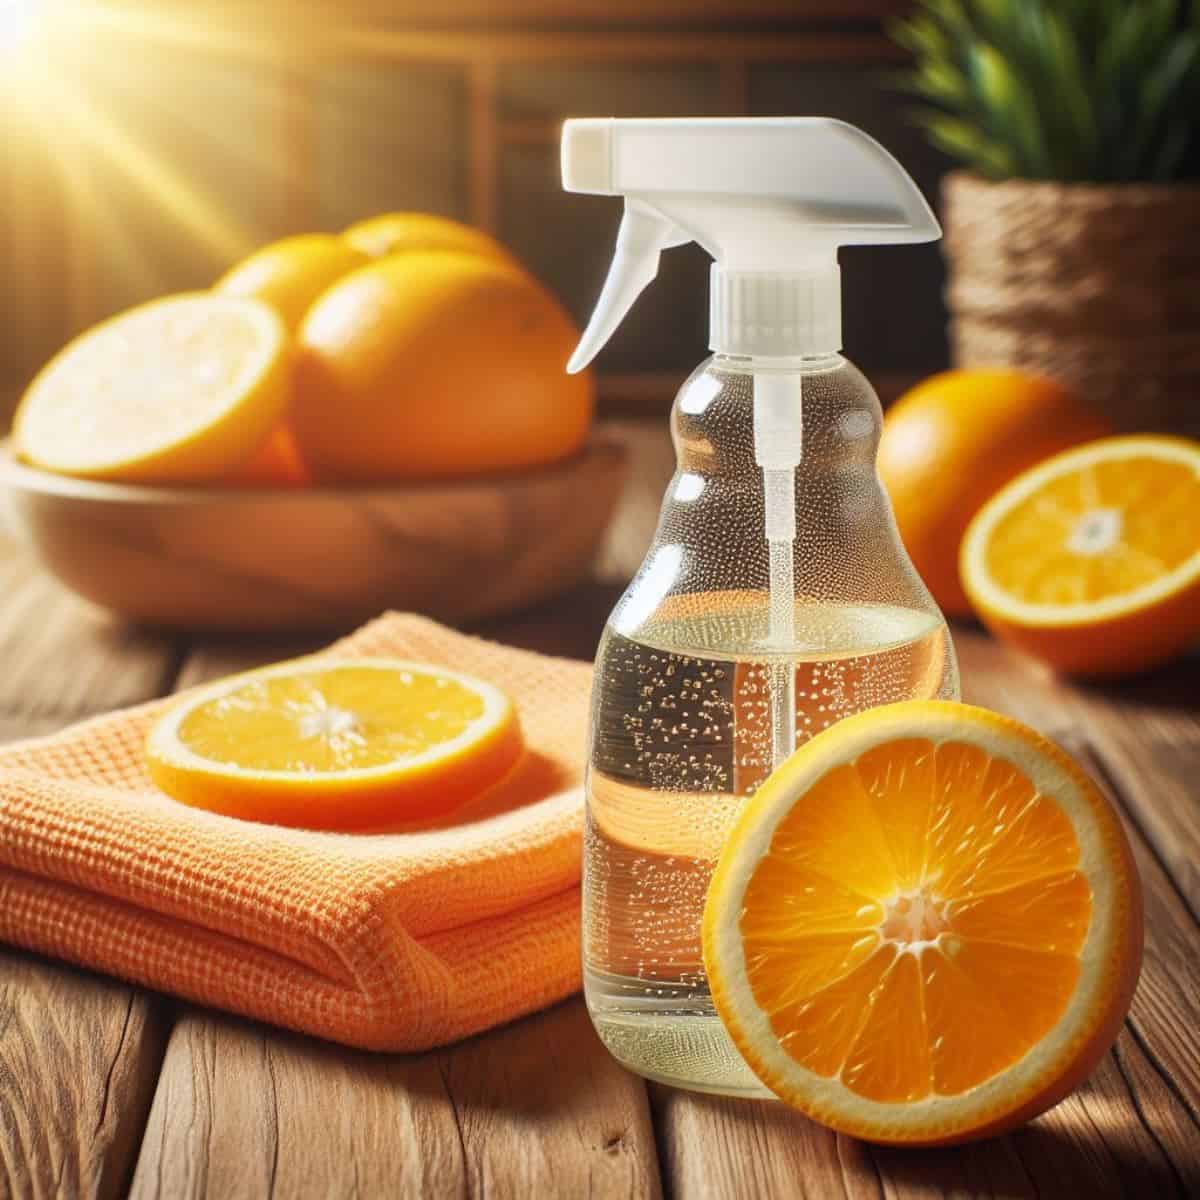 citrus solvent for cleaning, oranges, a towel